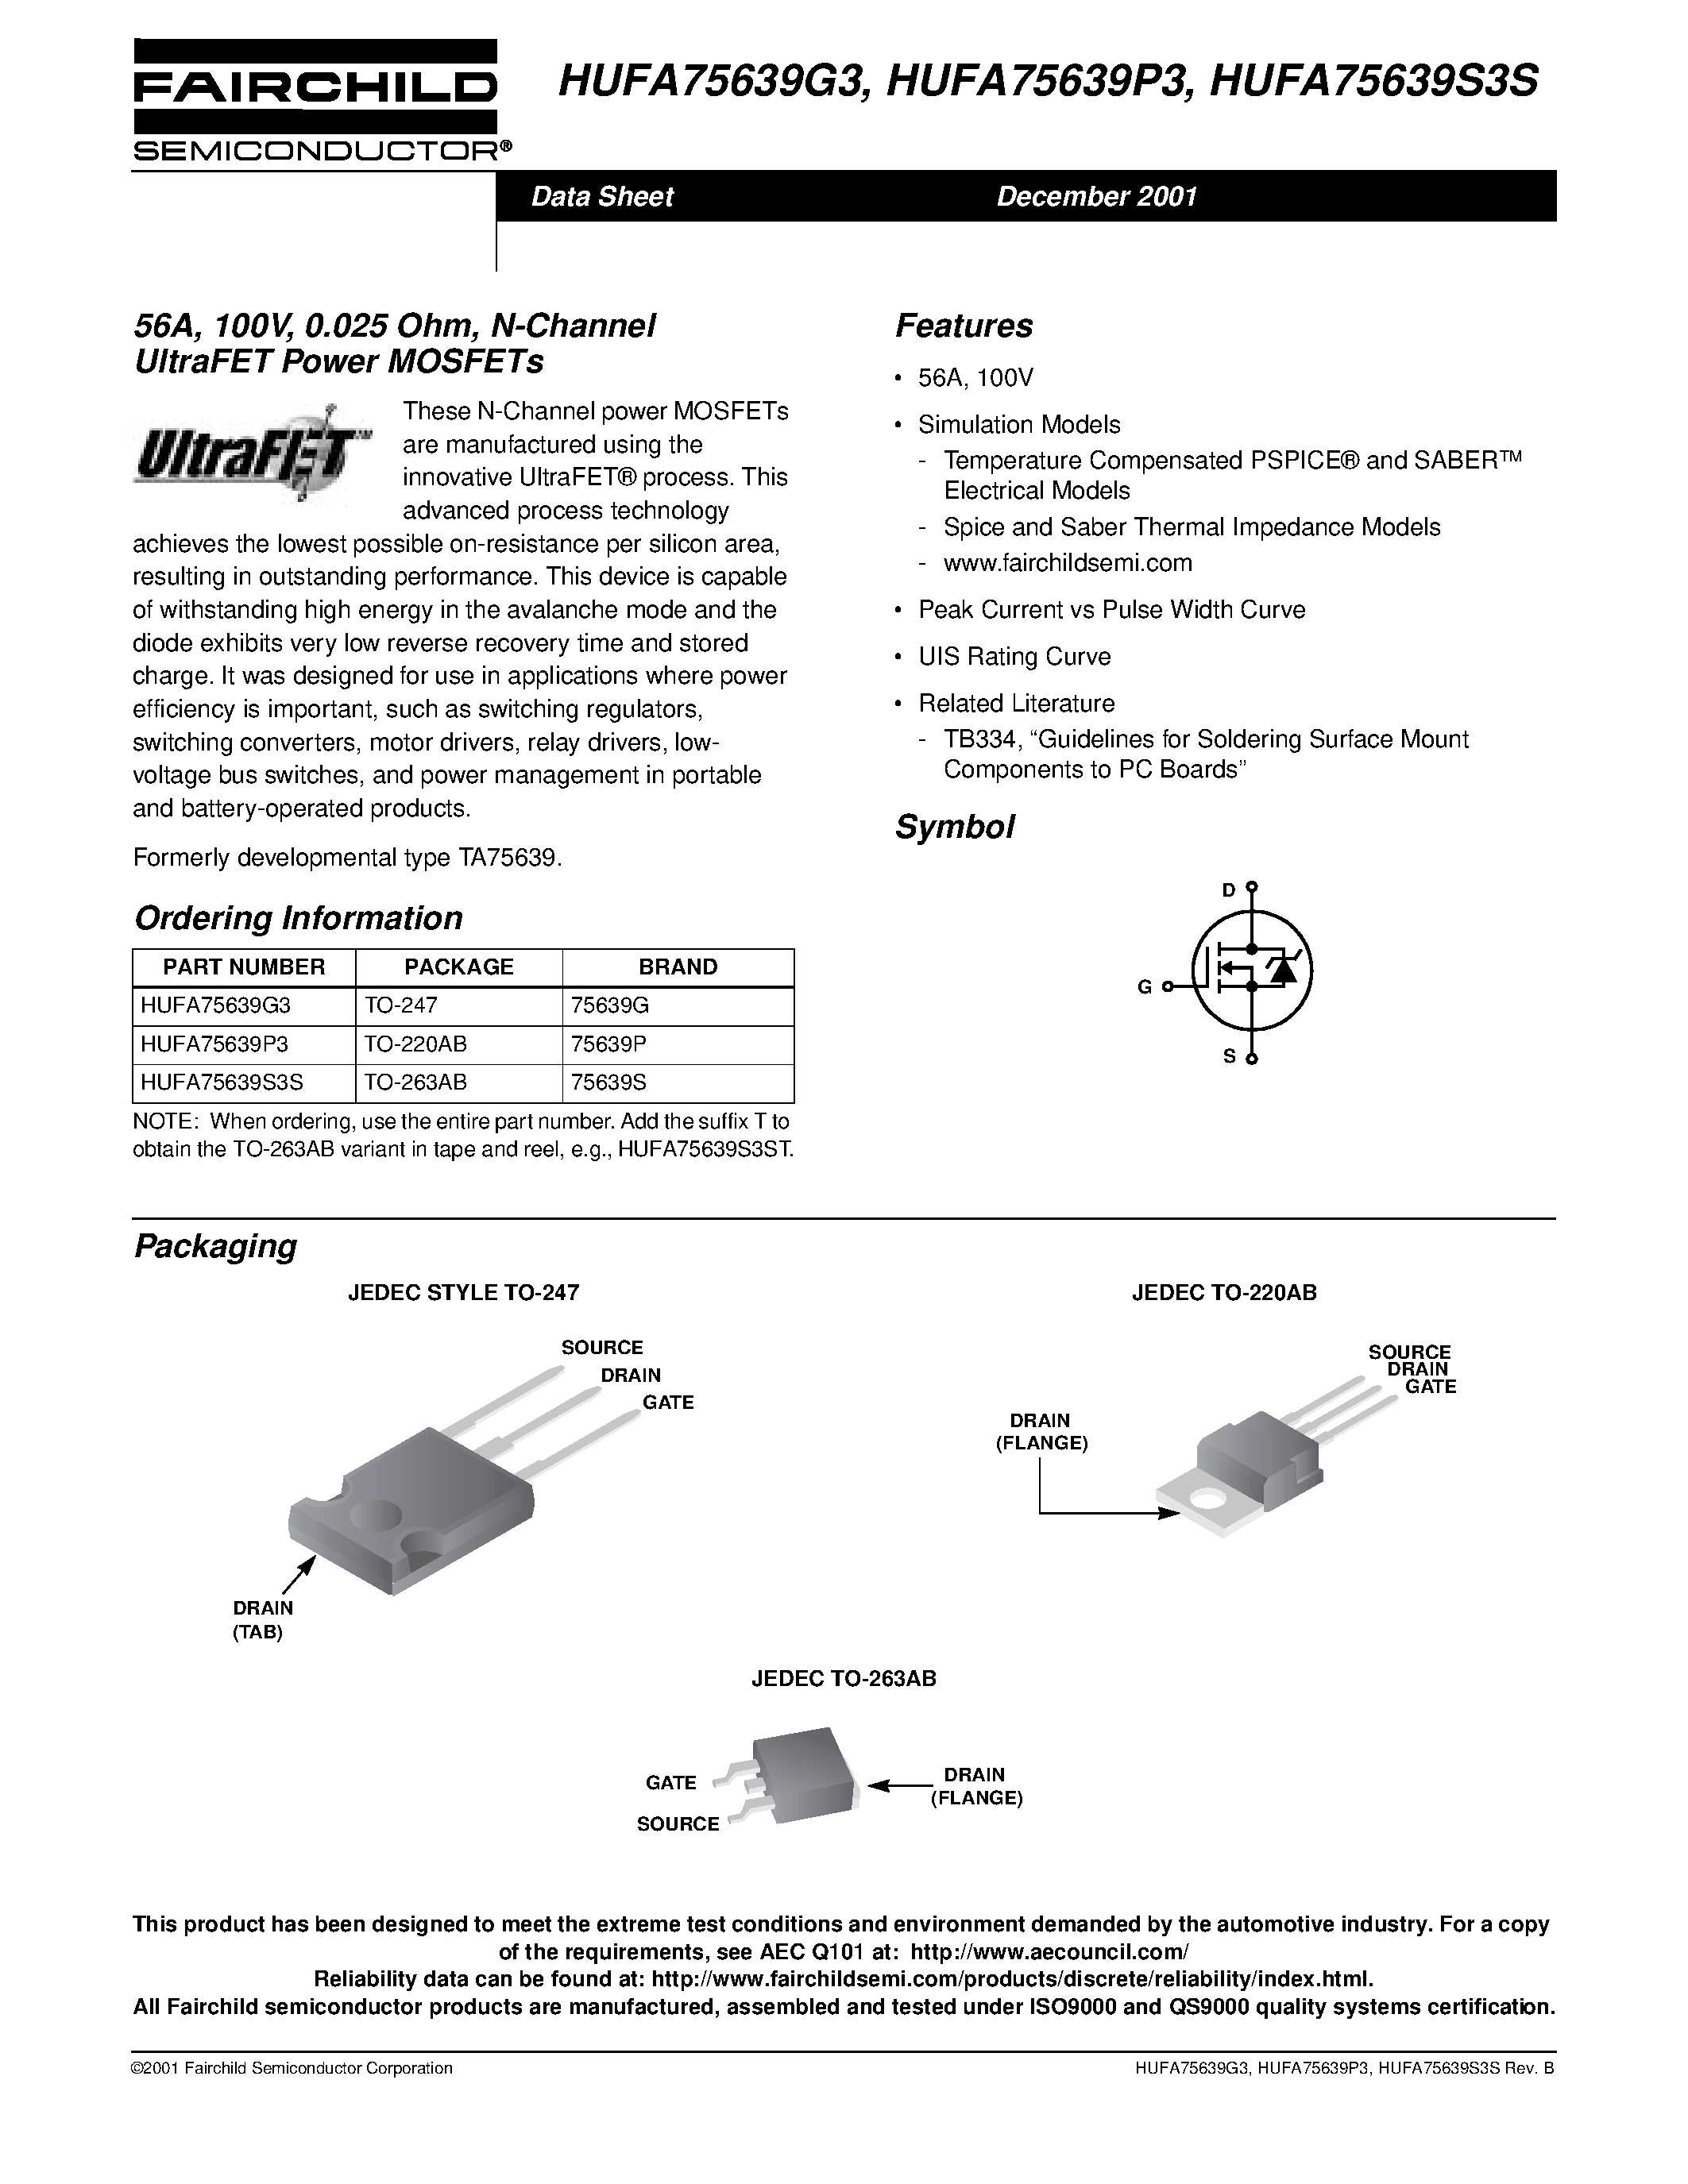 Datasheet HUFA75639G3 - 56A/ 100V/ 0.025 Ohm/ N-Channel UltraFET Power MOSFETs page 1